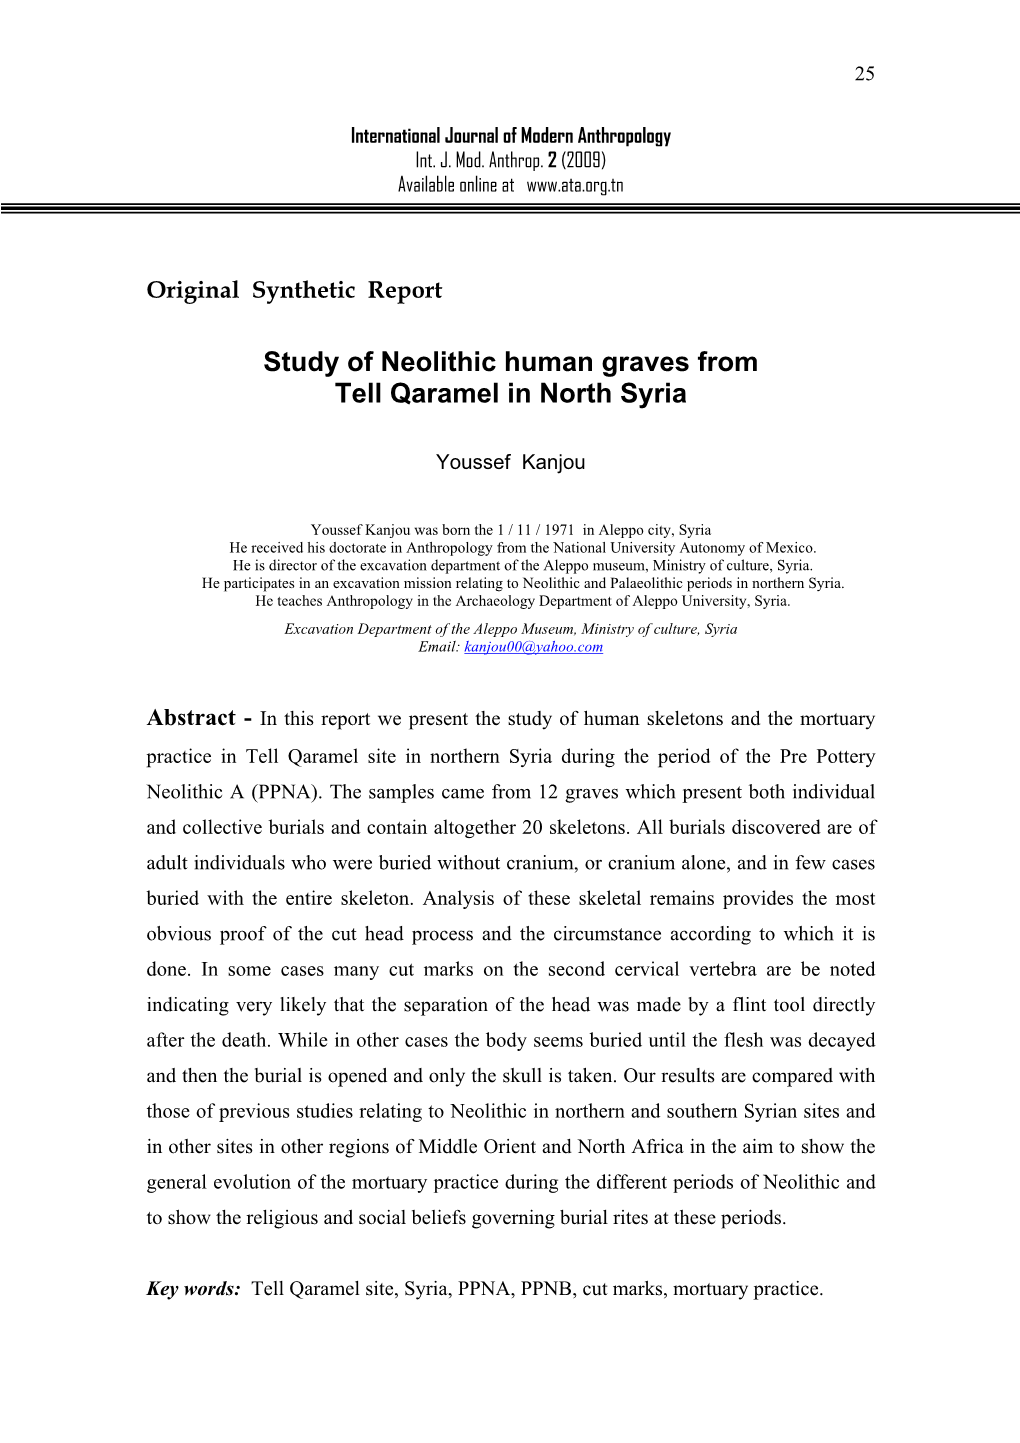 Study of Neolithic Human Graves from Tell Qaramel in North Syria